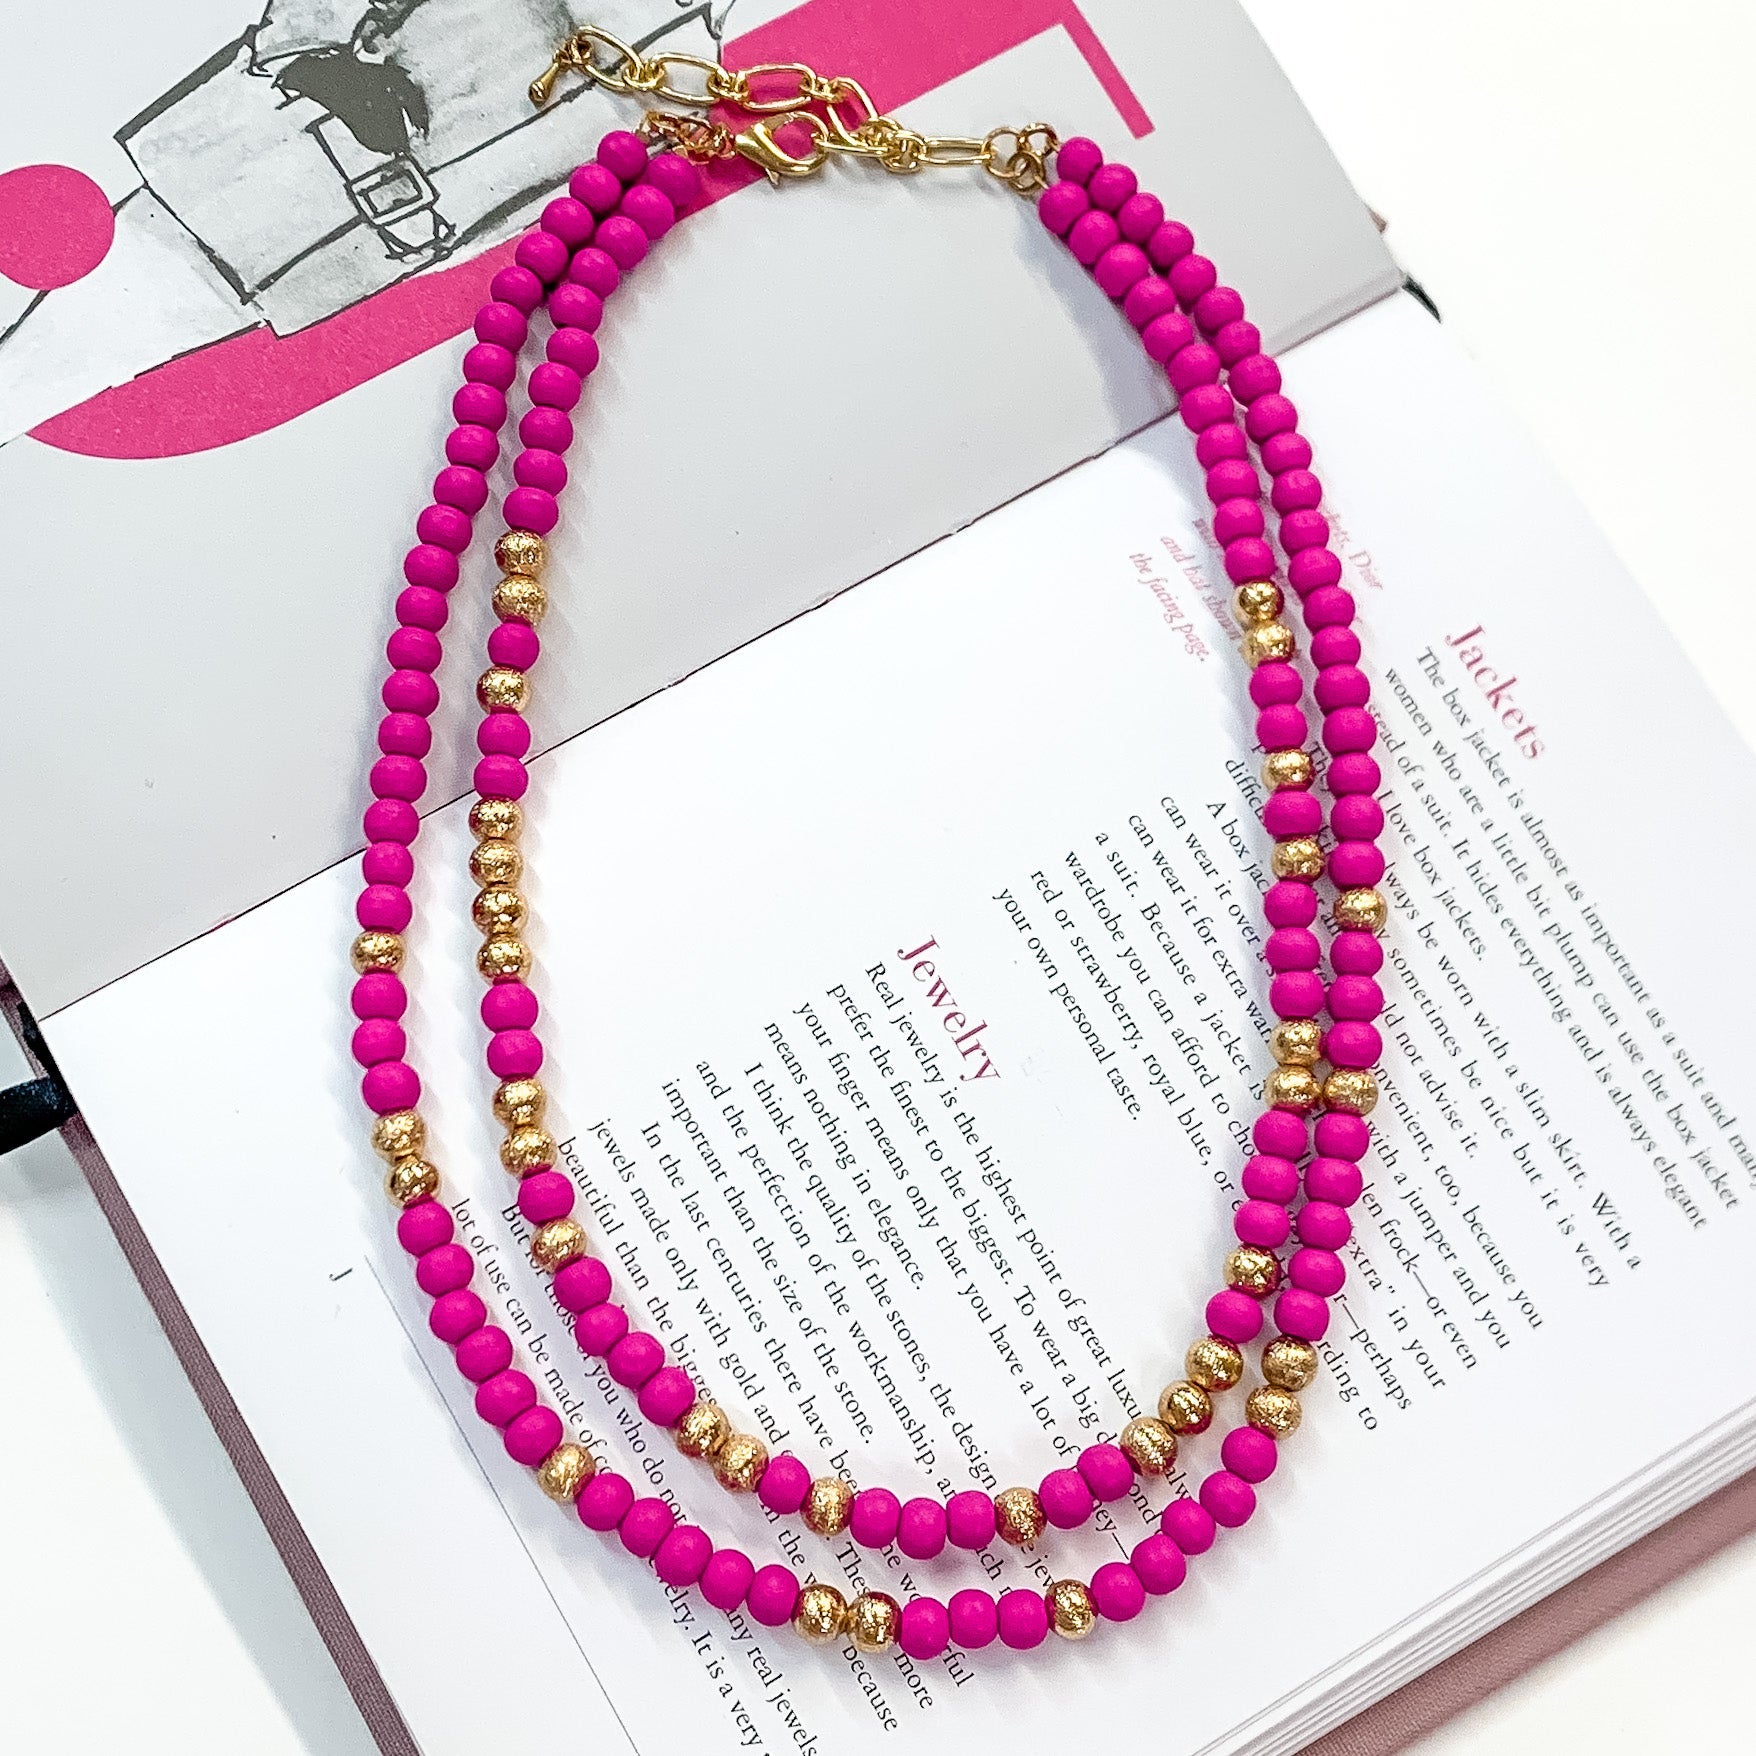 Pictured on an open book is a two strand fuchsia beaded necklace with gold beaded spacers and gold hardware.